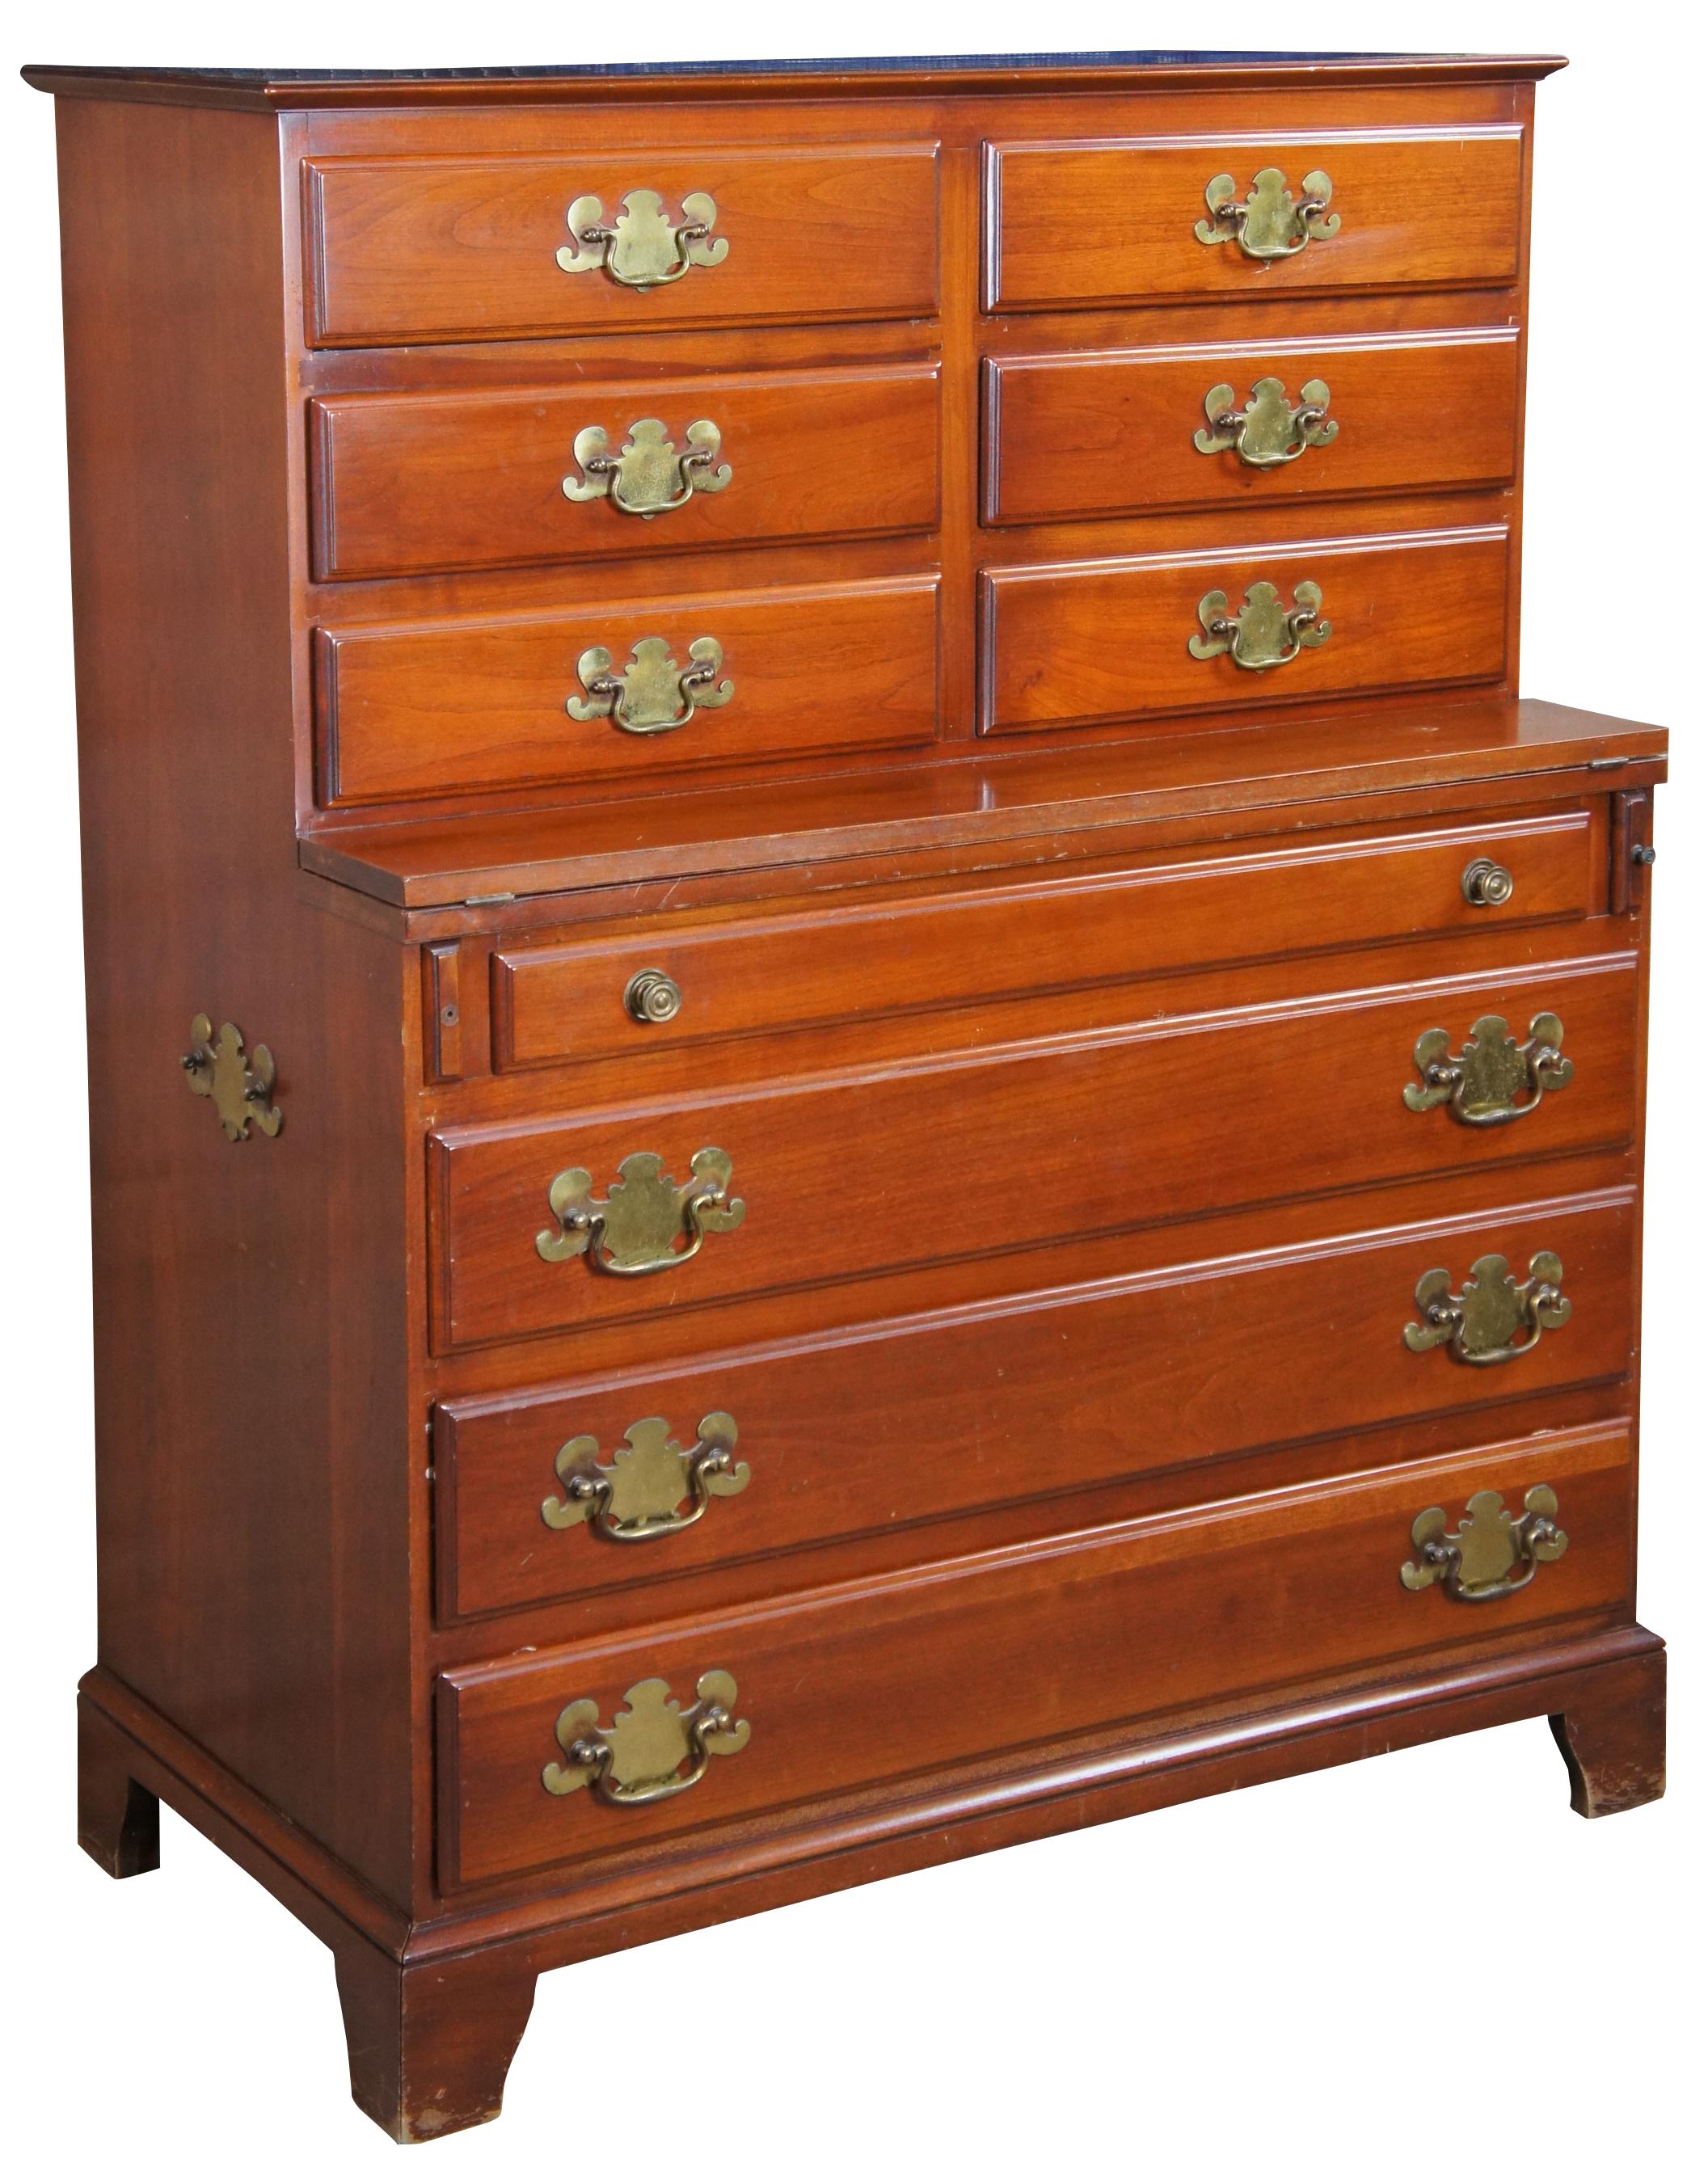 Vintage Youngsville Star MFG Co Sherwood Reproductions Colonial style chest or dresser. Made from cherry with a chest on chest design featuring a fold out surface and chippendale style hardware, Circa 1940 - 1965. 

Youngsville Star Manufacturing